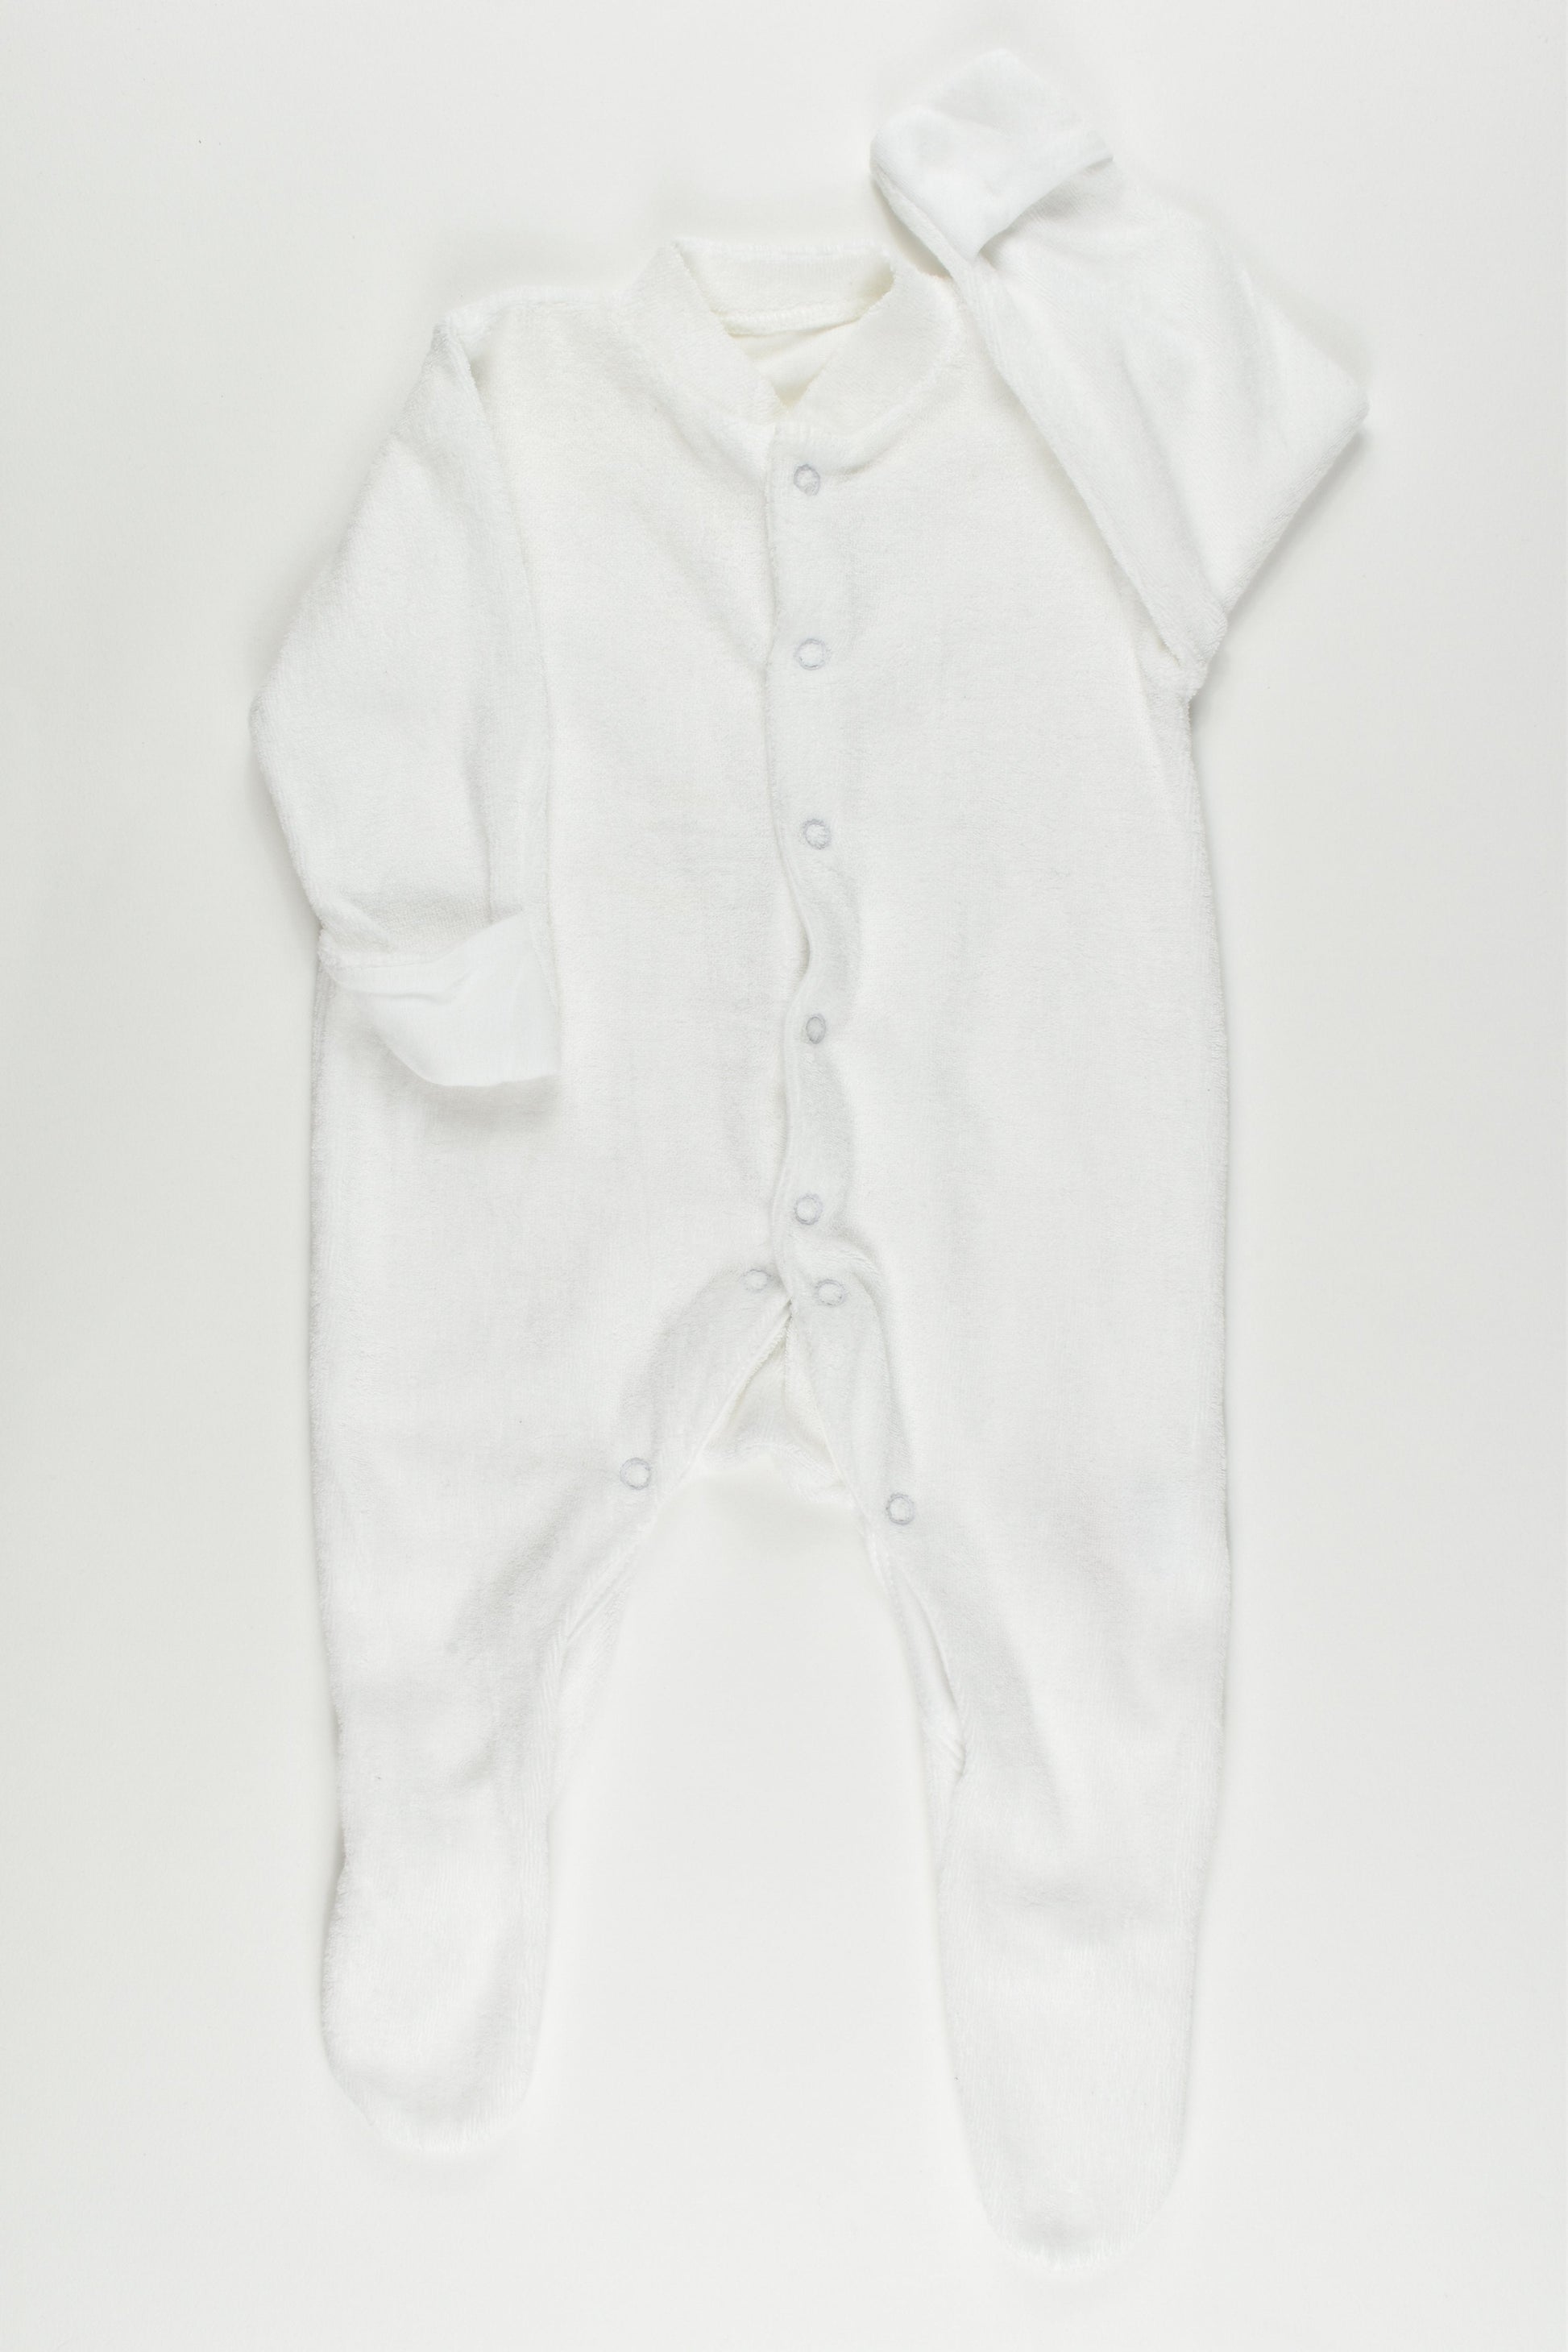 NEW Mothercare Size Up to 4.5 kg Romper